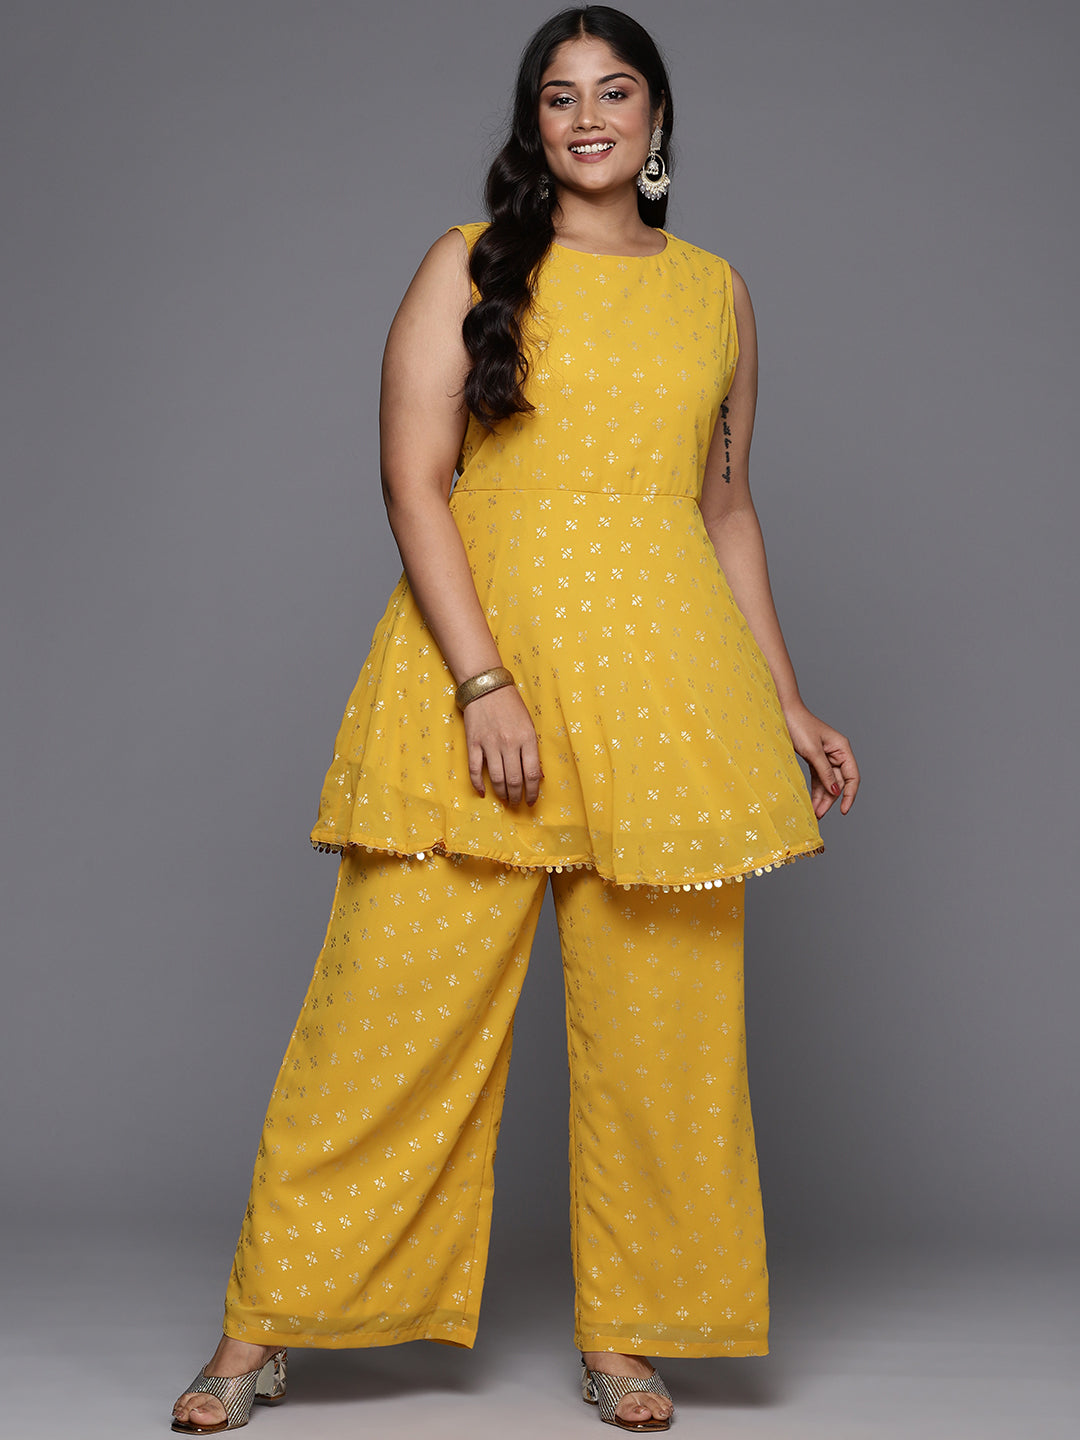 A PLUS BY AHALYAA Plus Size Ethnic Motifs Printed Regular Kurti with Palazzos